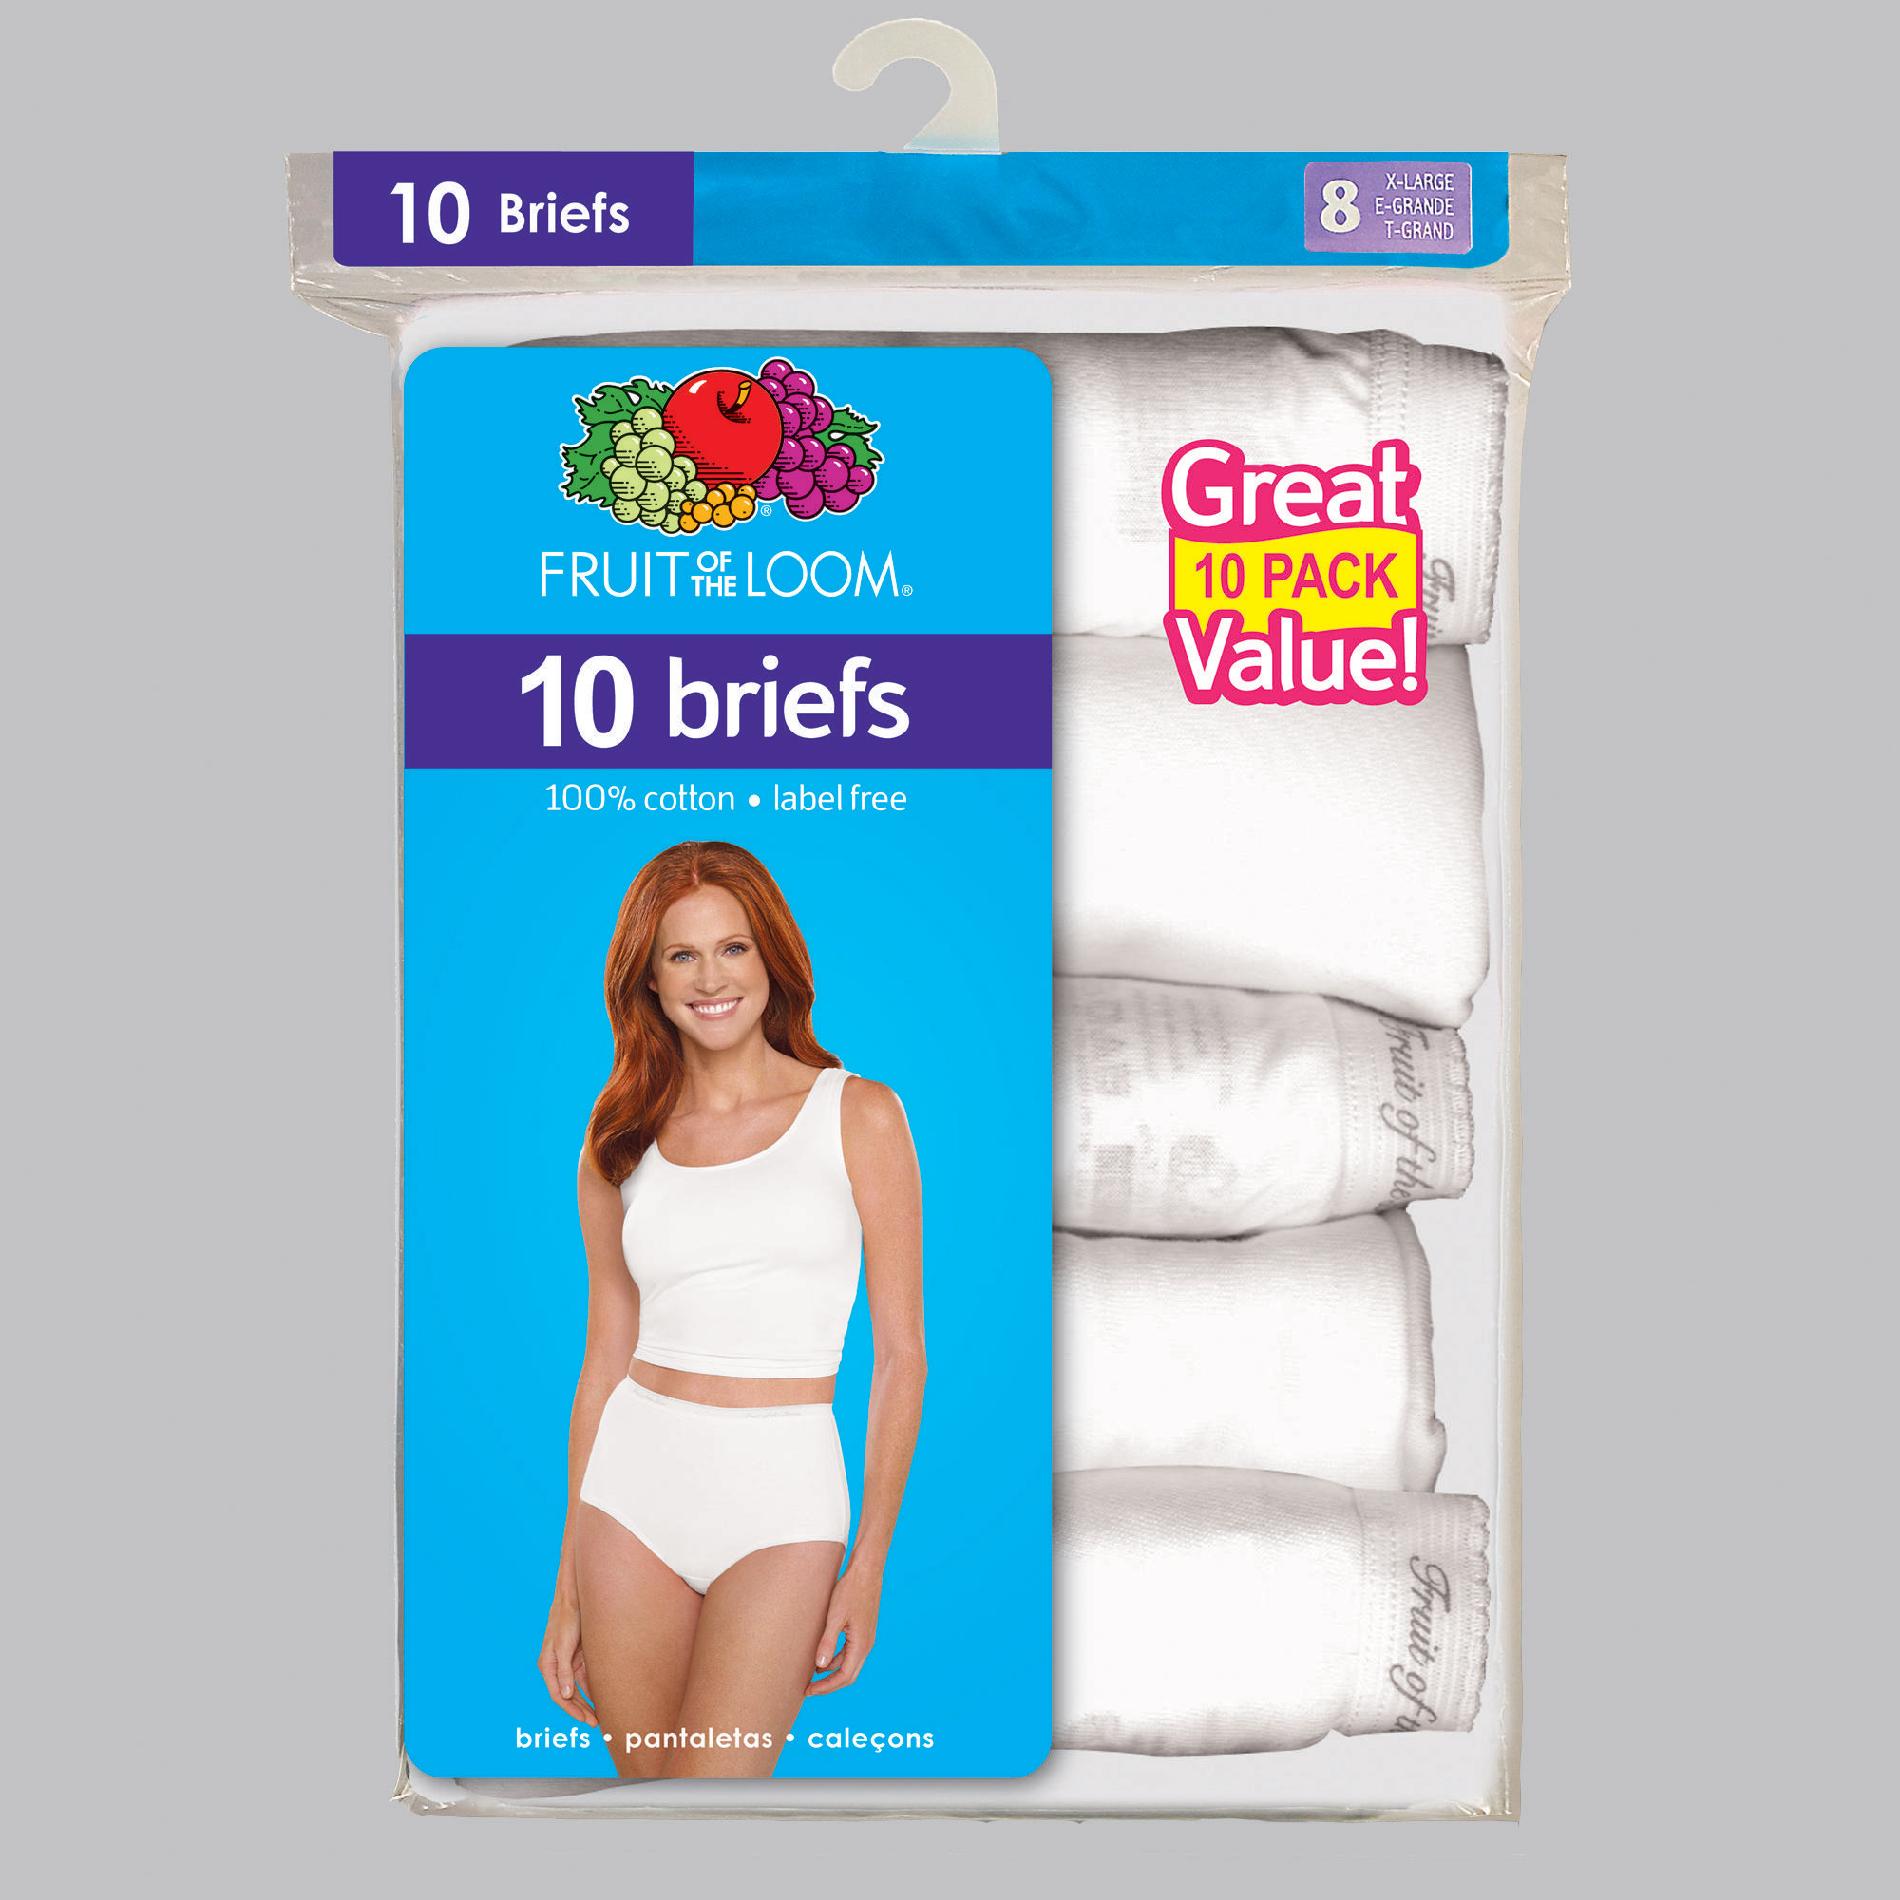 Fruit of the Loom Women's 10-Pack Cotton Briefs - Online Exclusive